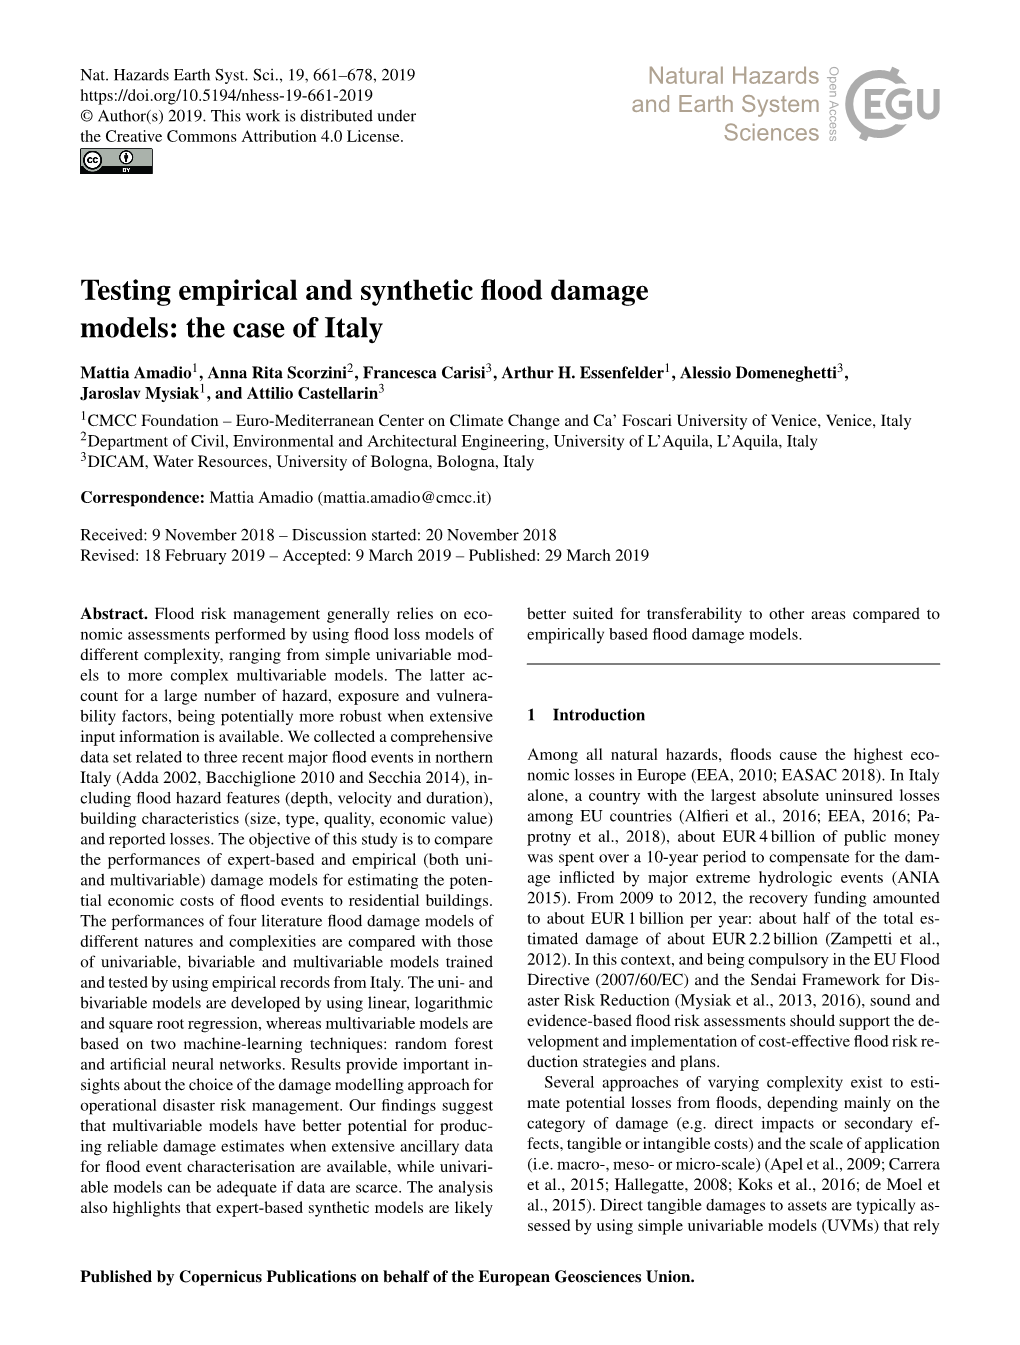 Testing Empirical and Synthetic Flood Damage Models: the Case of Italy